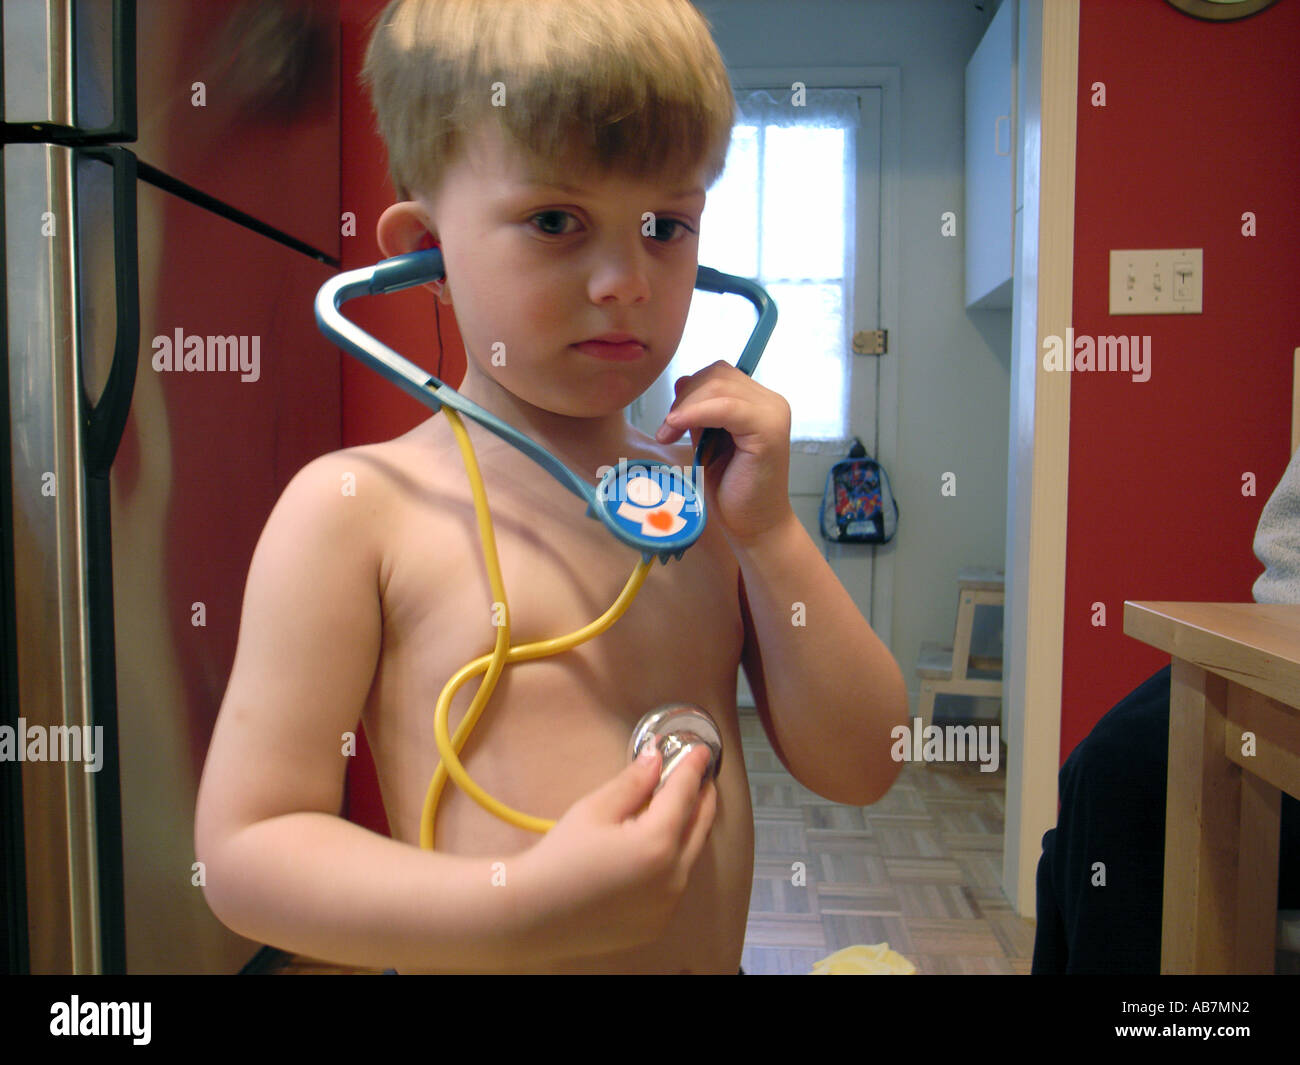 Photo of a Small Child playing with a toy Stethoscope listening to his own heart beat Stock Photo